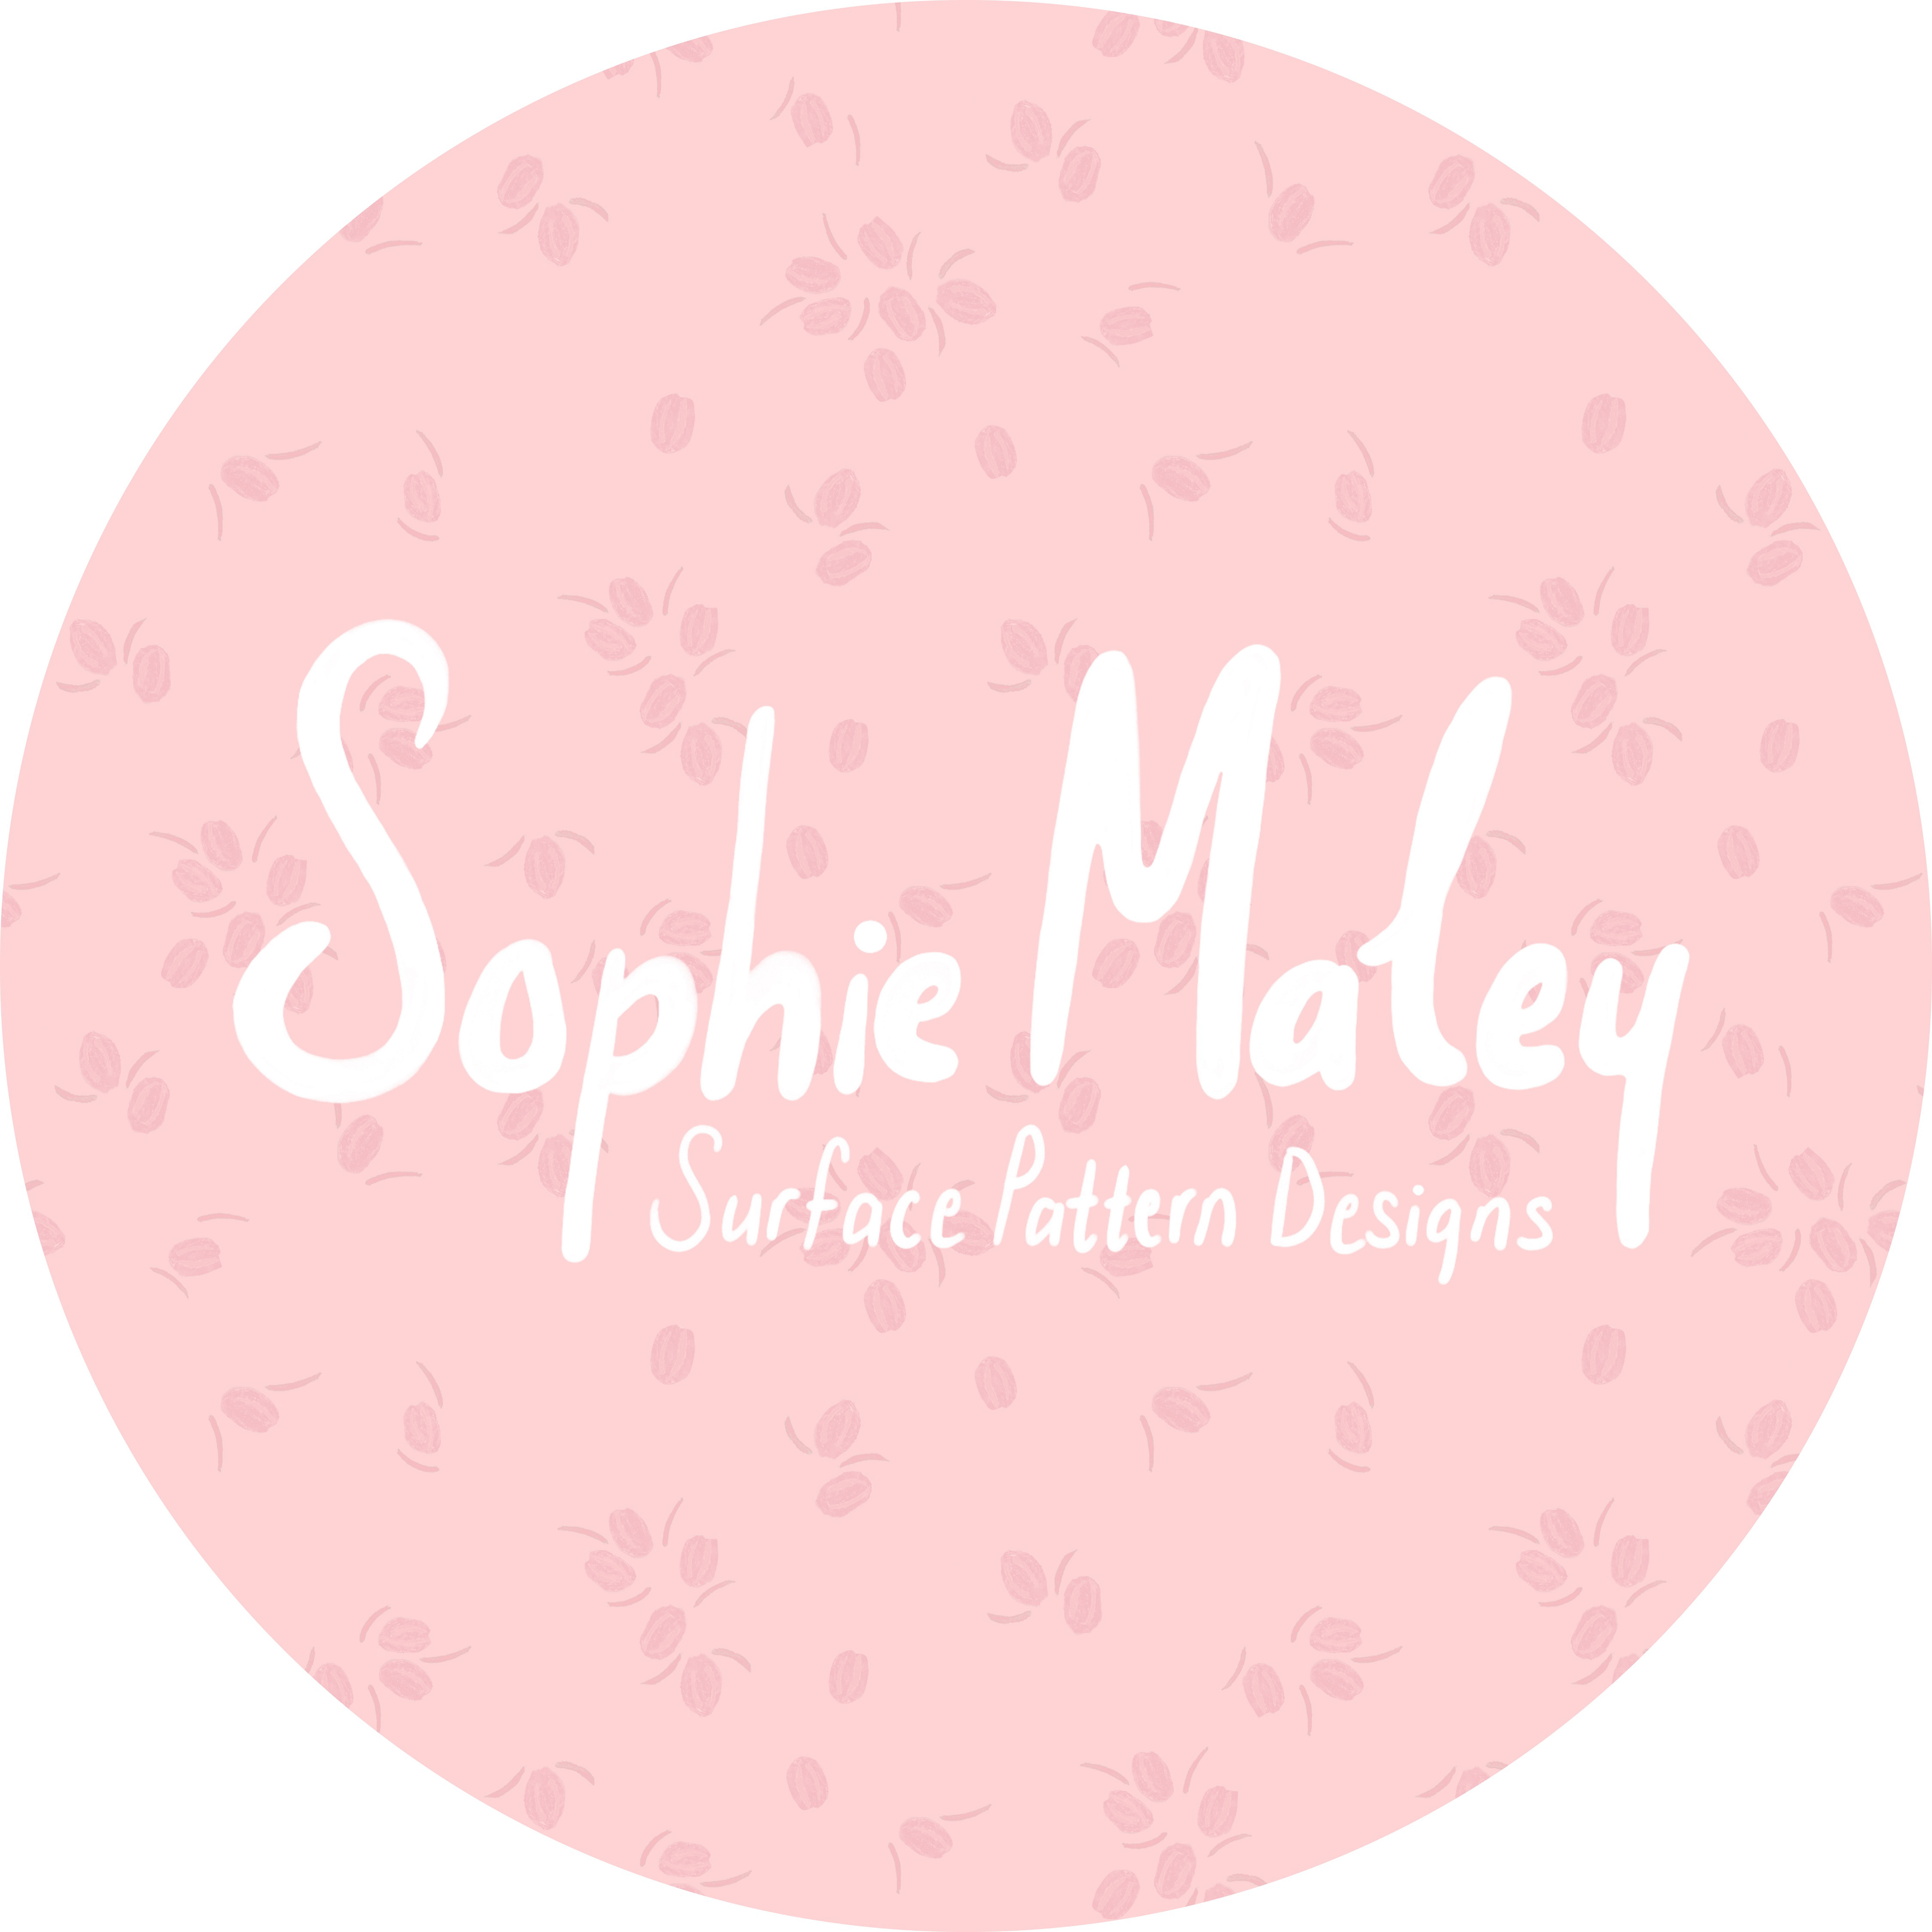 Sophie Maley